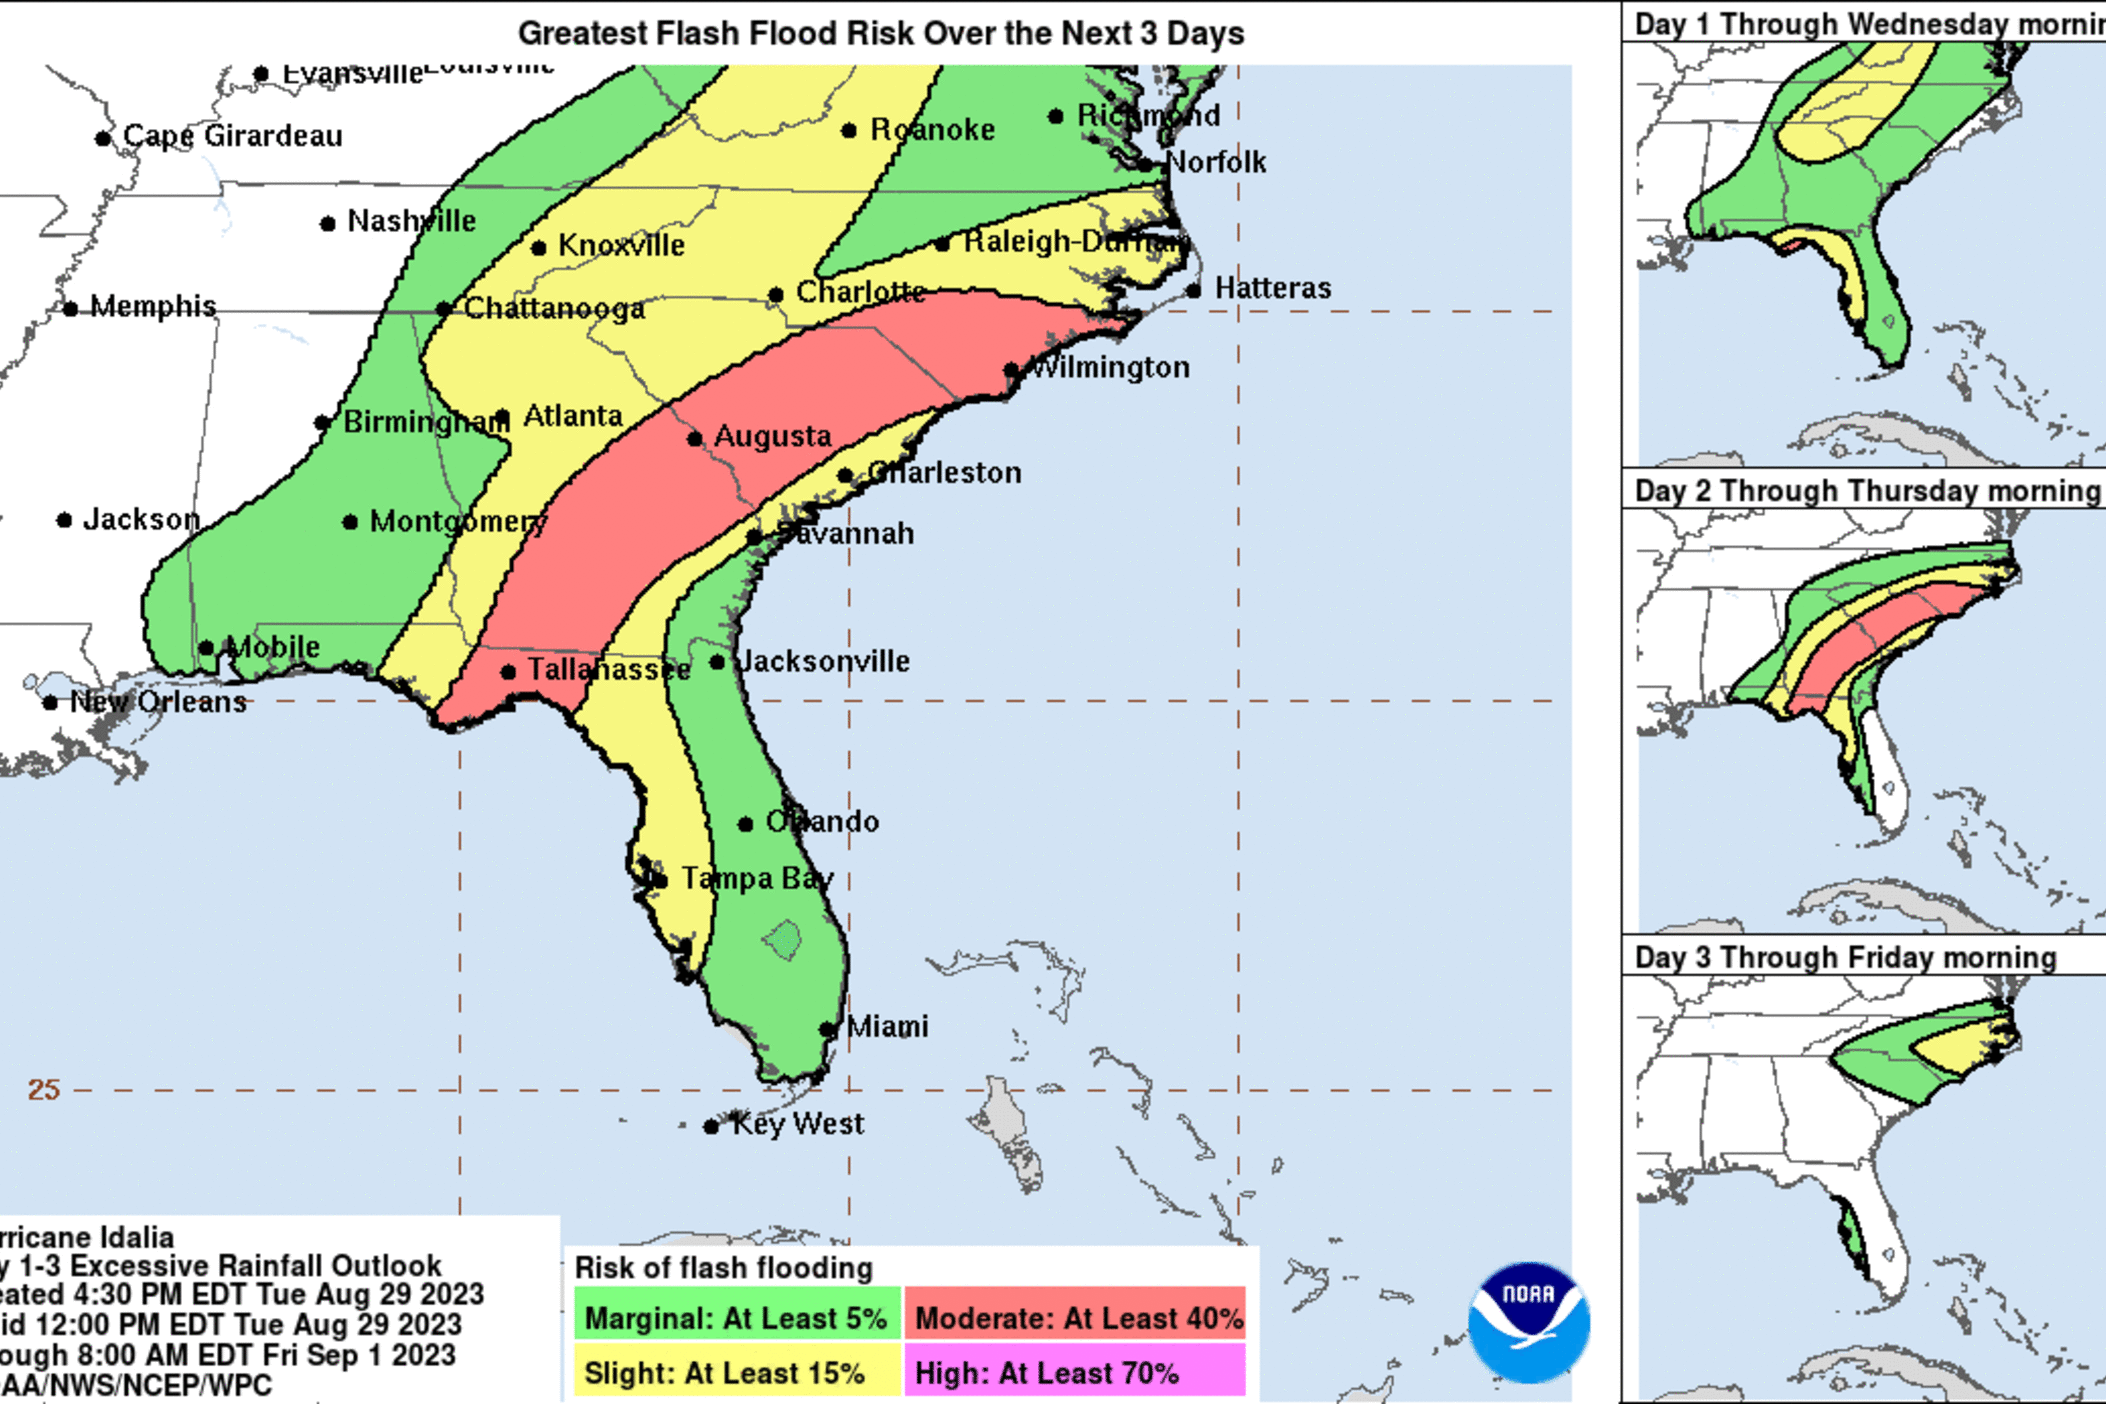 The National Weather Service predicts Georgia has up to a 40% greater risk for flash floods from Idalia caused by excessive rainfall through Friday, Sept. 1, 2023.  